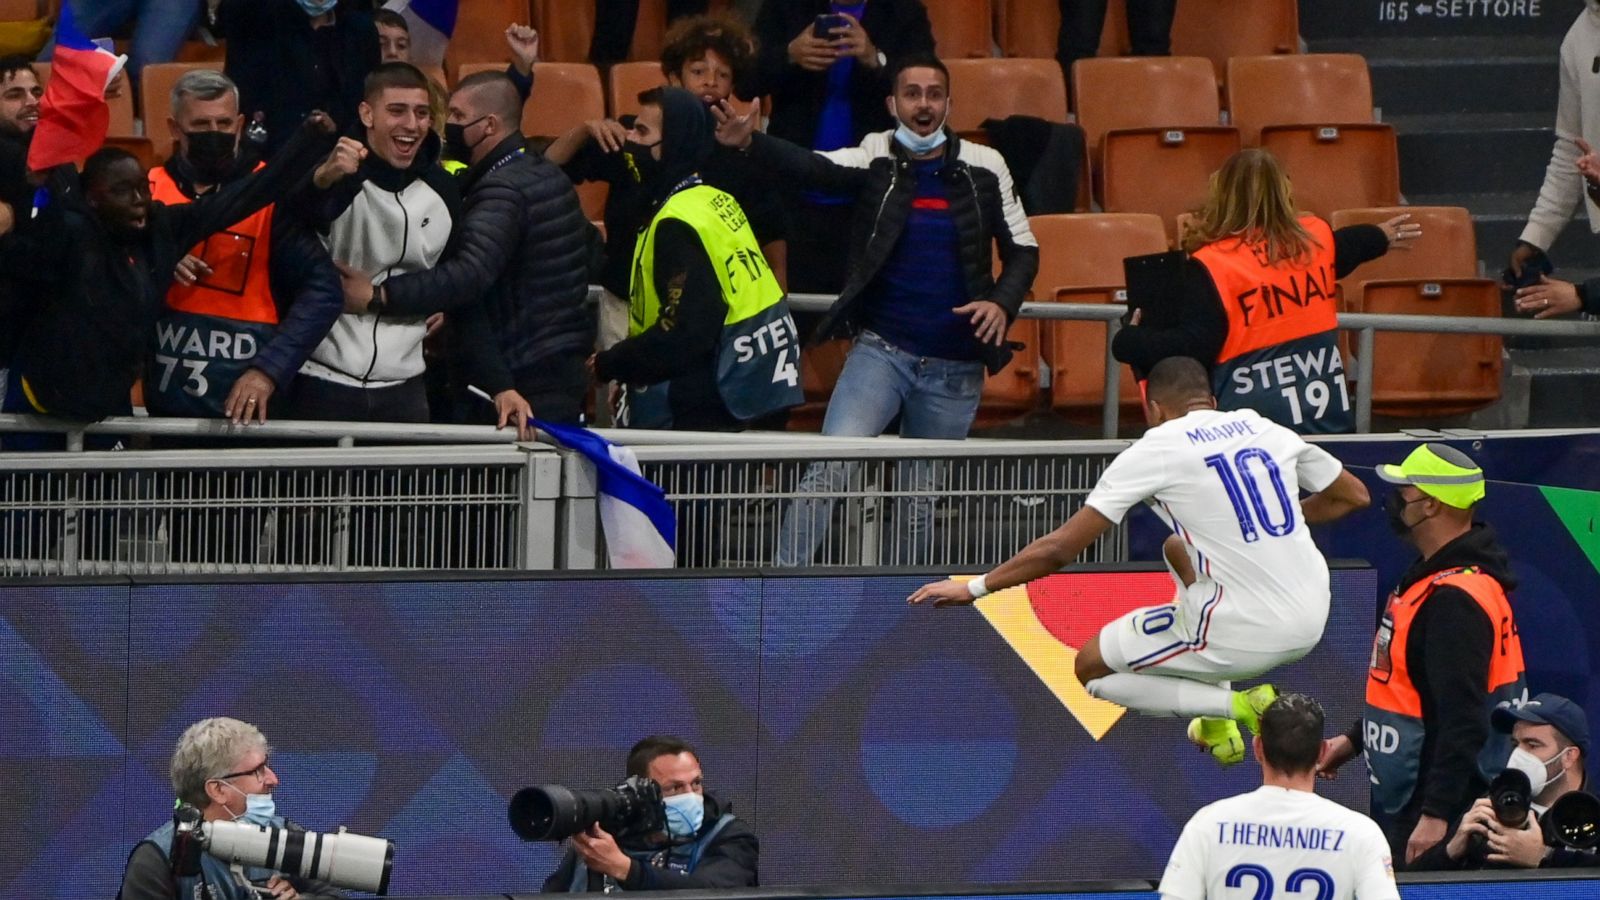 Mbappé nets late as France beats Spain to win Nations League